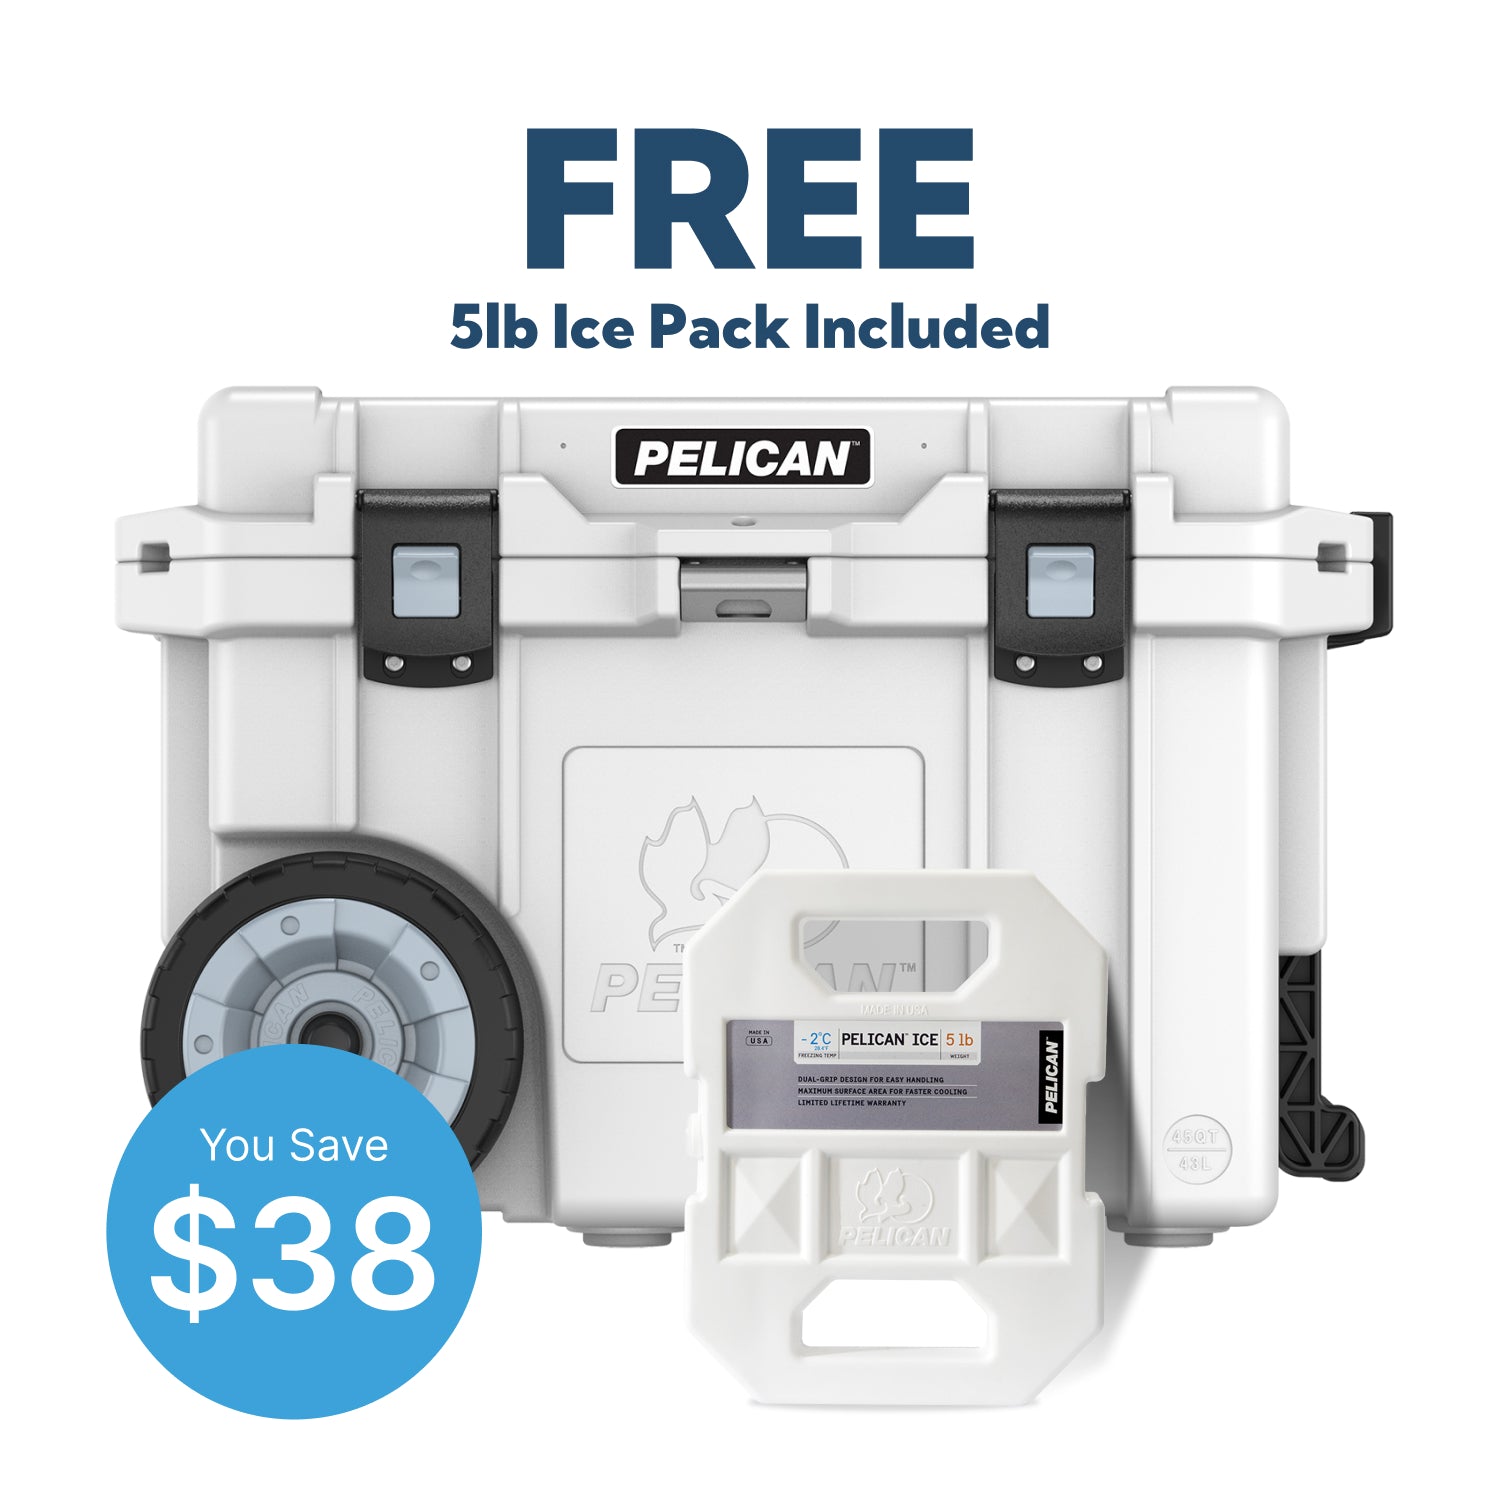 Charcoal Pelican 45QT Elite Wheeled Cooler with Free Pelican Ice Pack